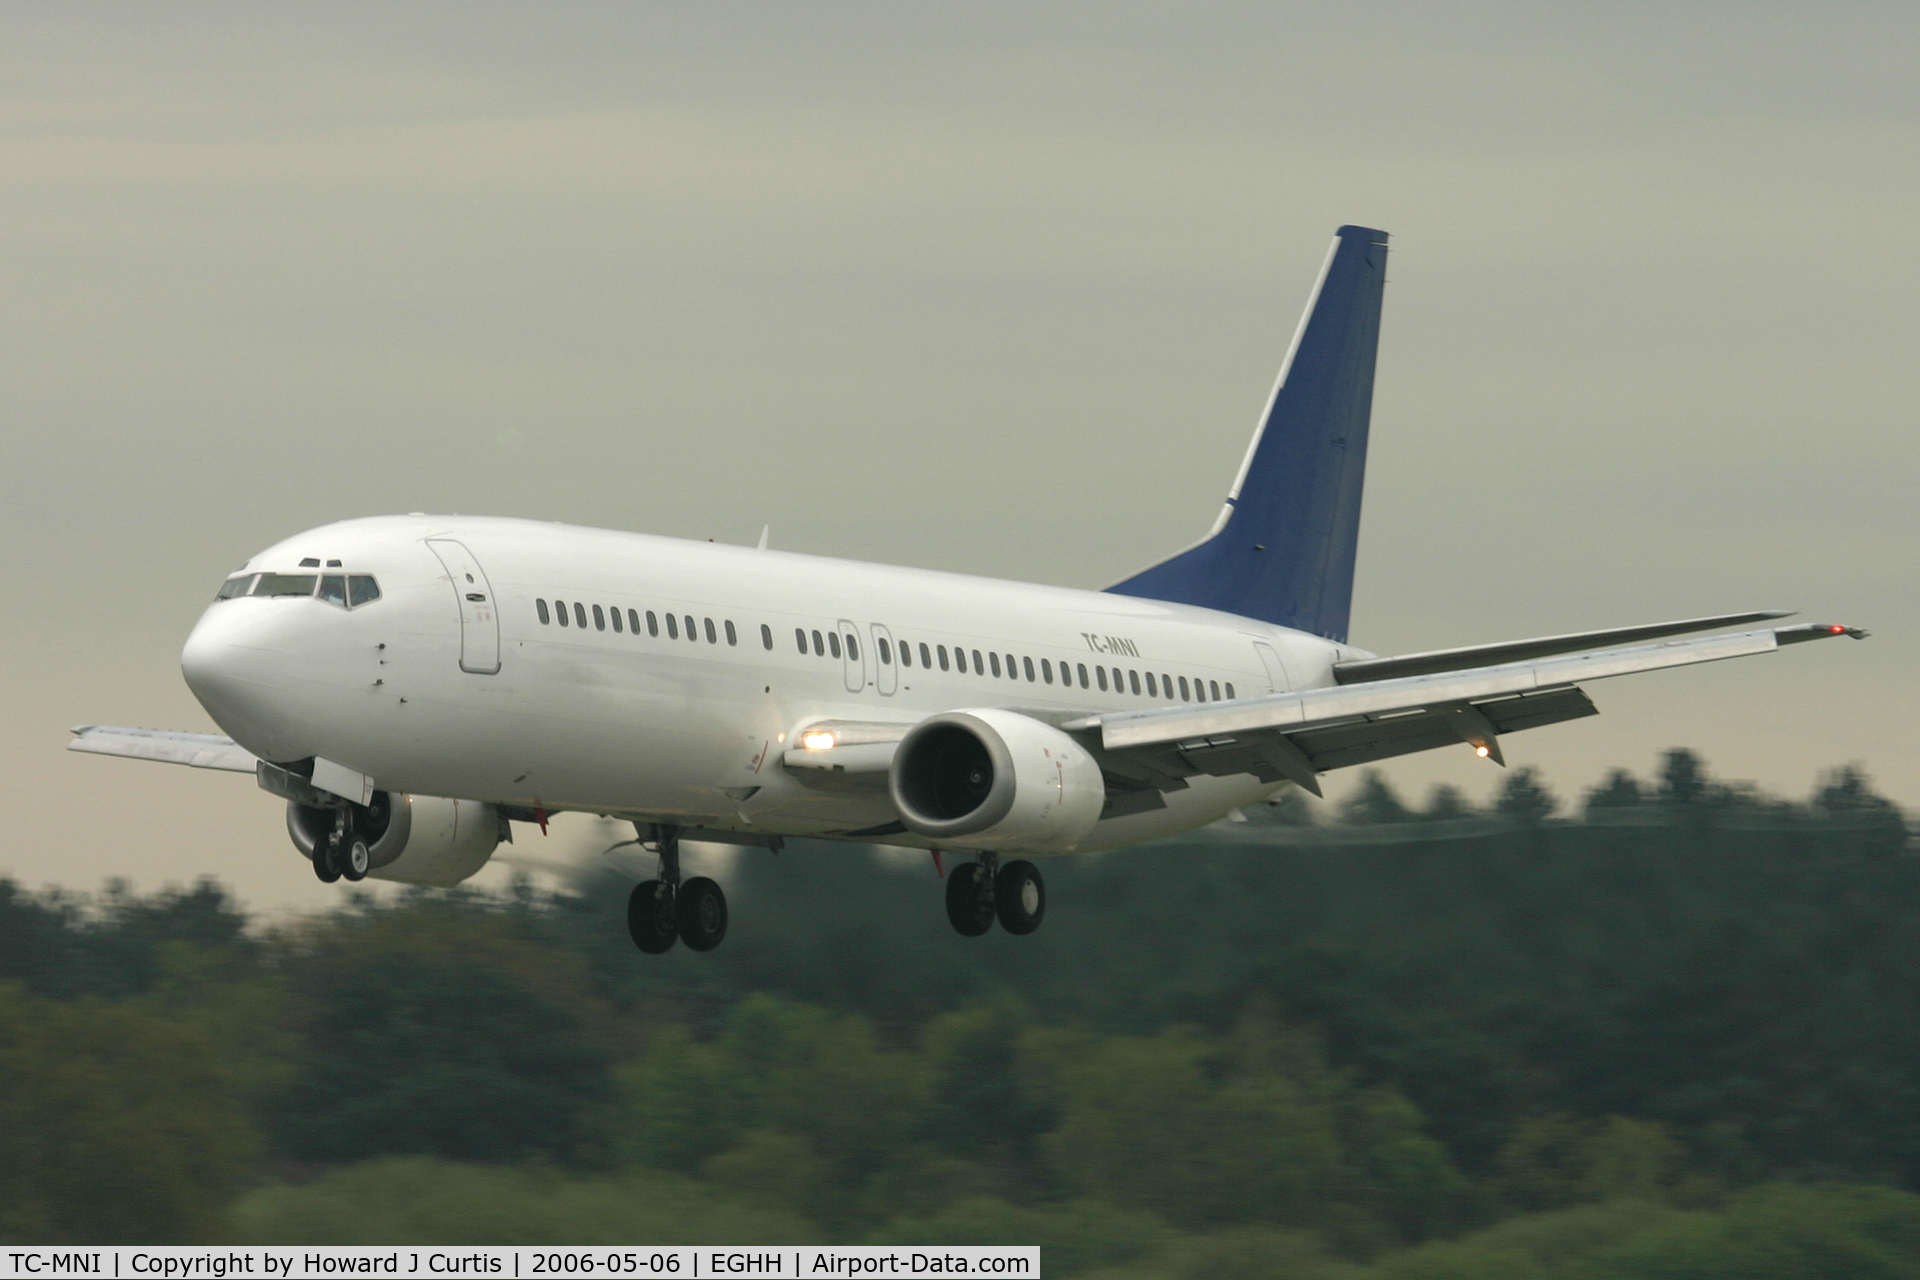 TC-MNI, 1989 Boeing 737-4K5 C/N 24128, On approach to runway 26.